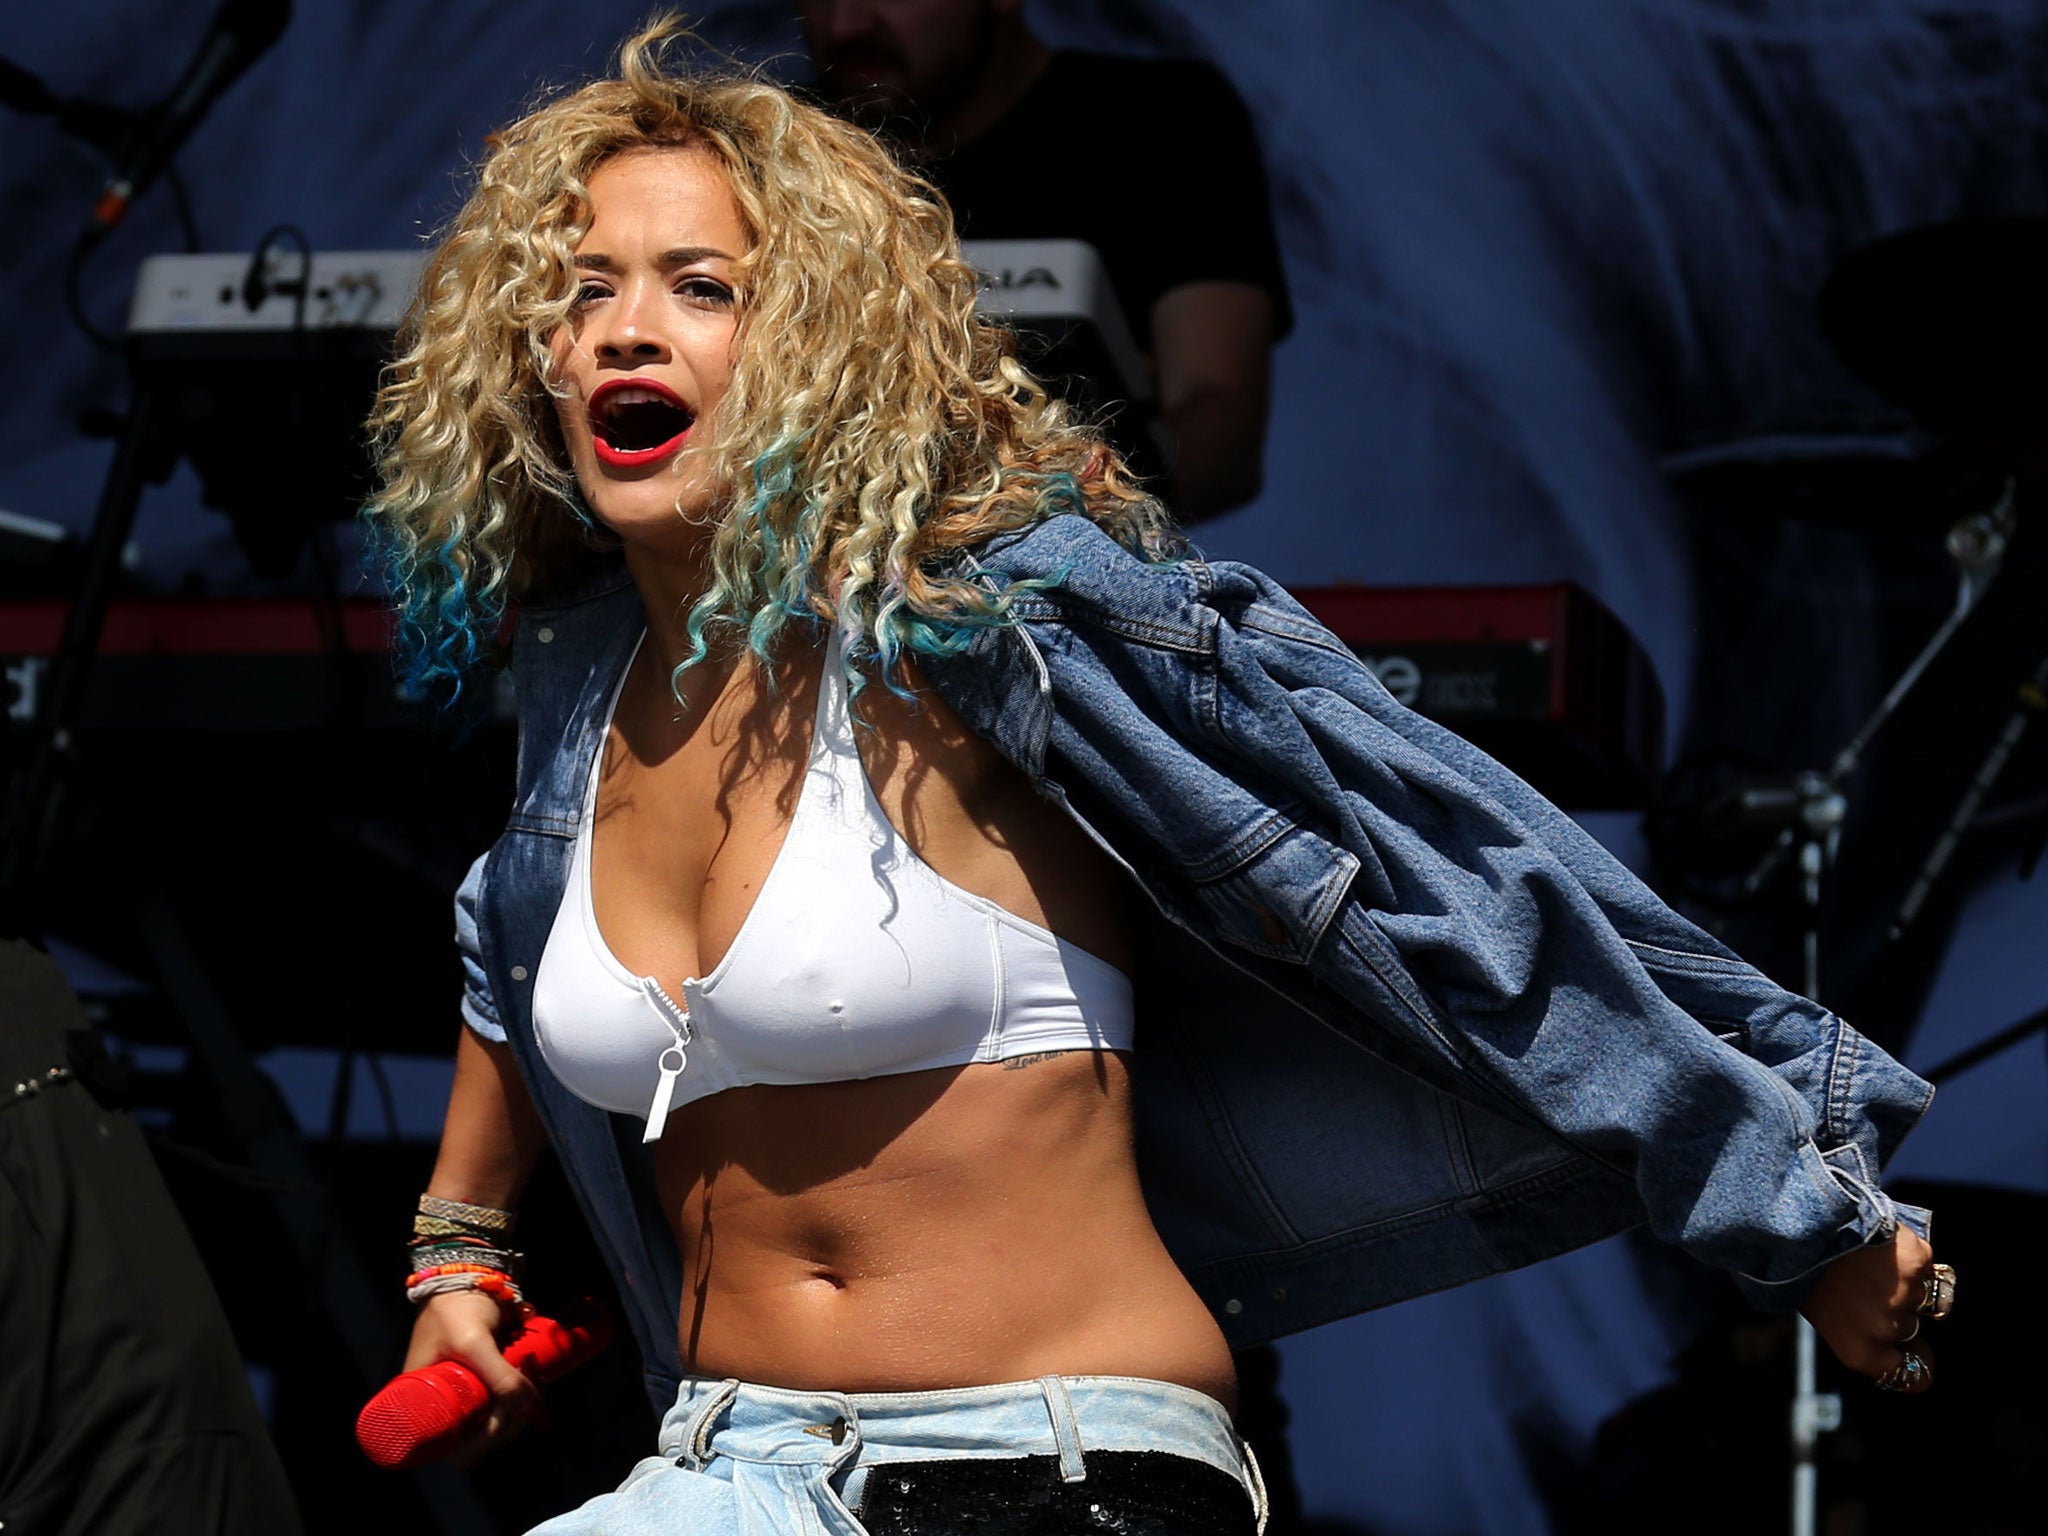 Rita Ora performs on the main stage during the 20th T in the Park music festival at Kinross